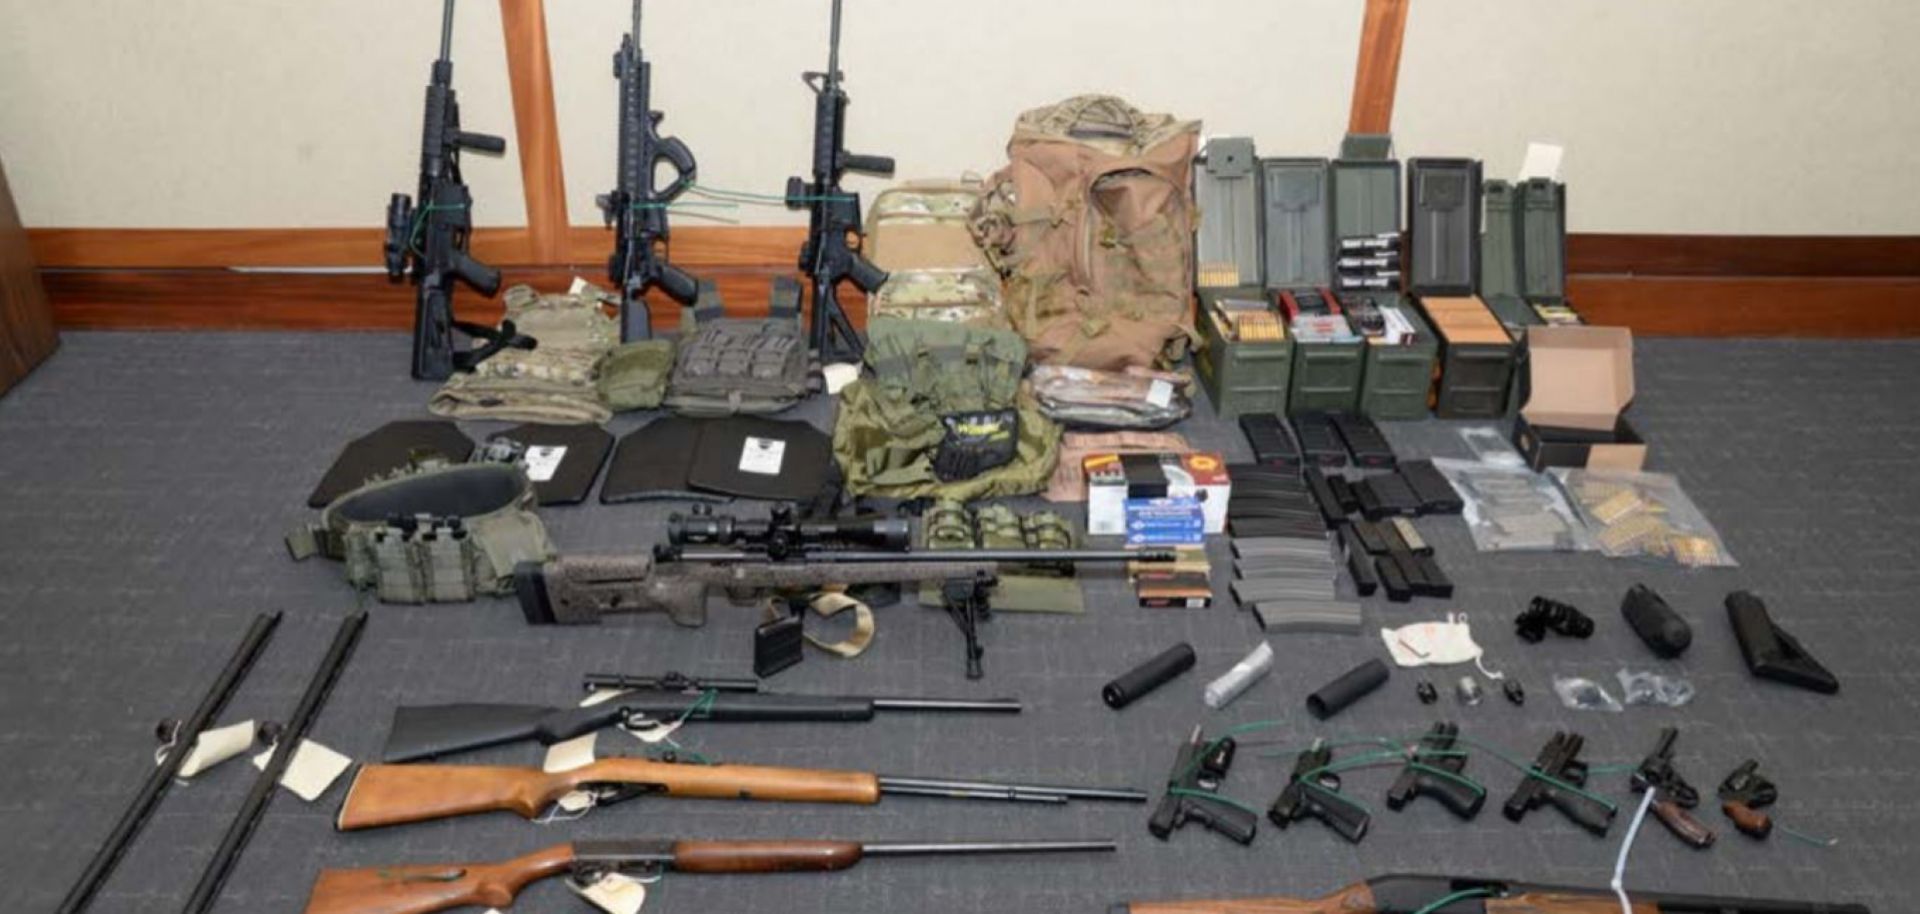 A collection of weapons and ammunition federal agents say they found in the apartment of a member of the U.S. Coast Guard accused of plotting a major terror attack against Americans.